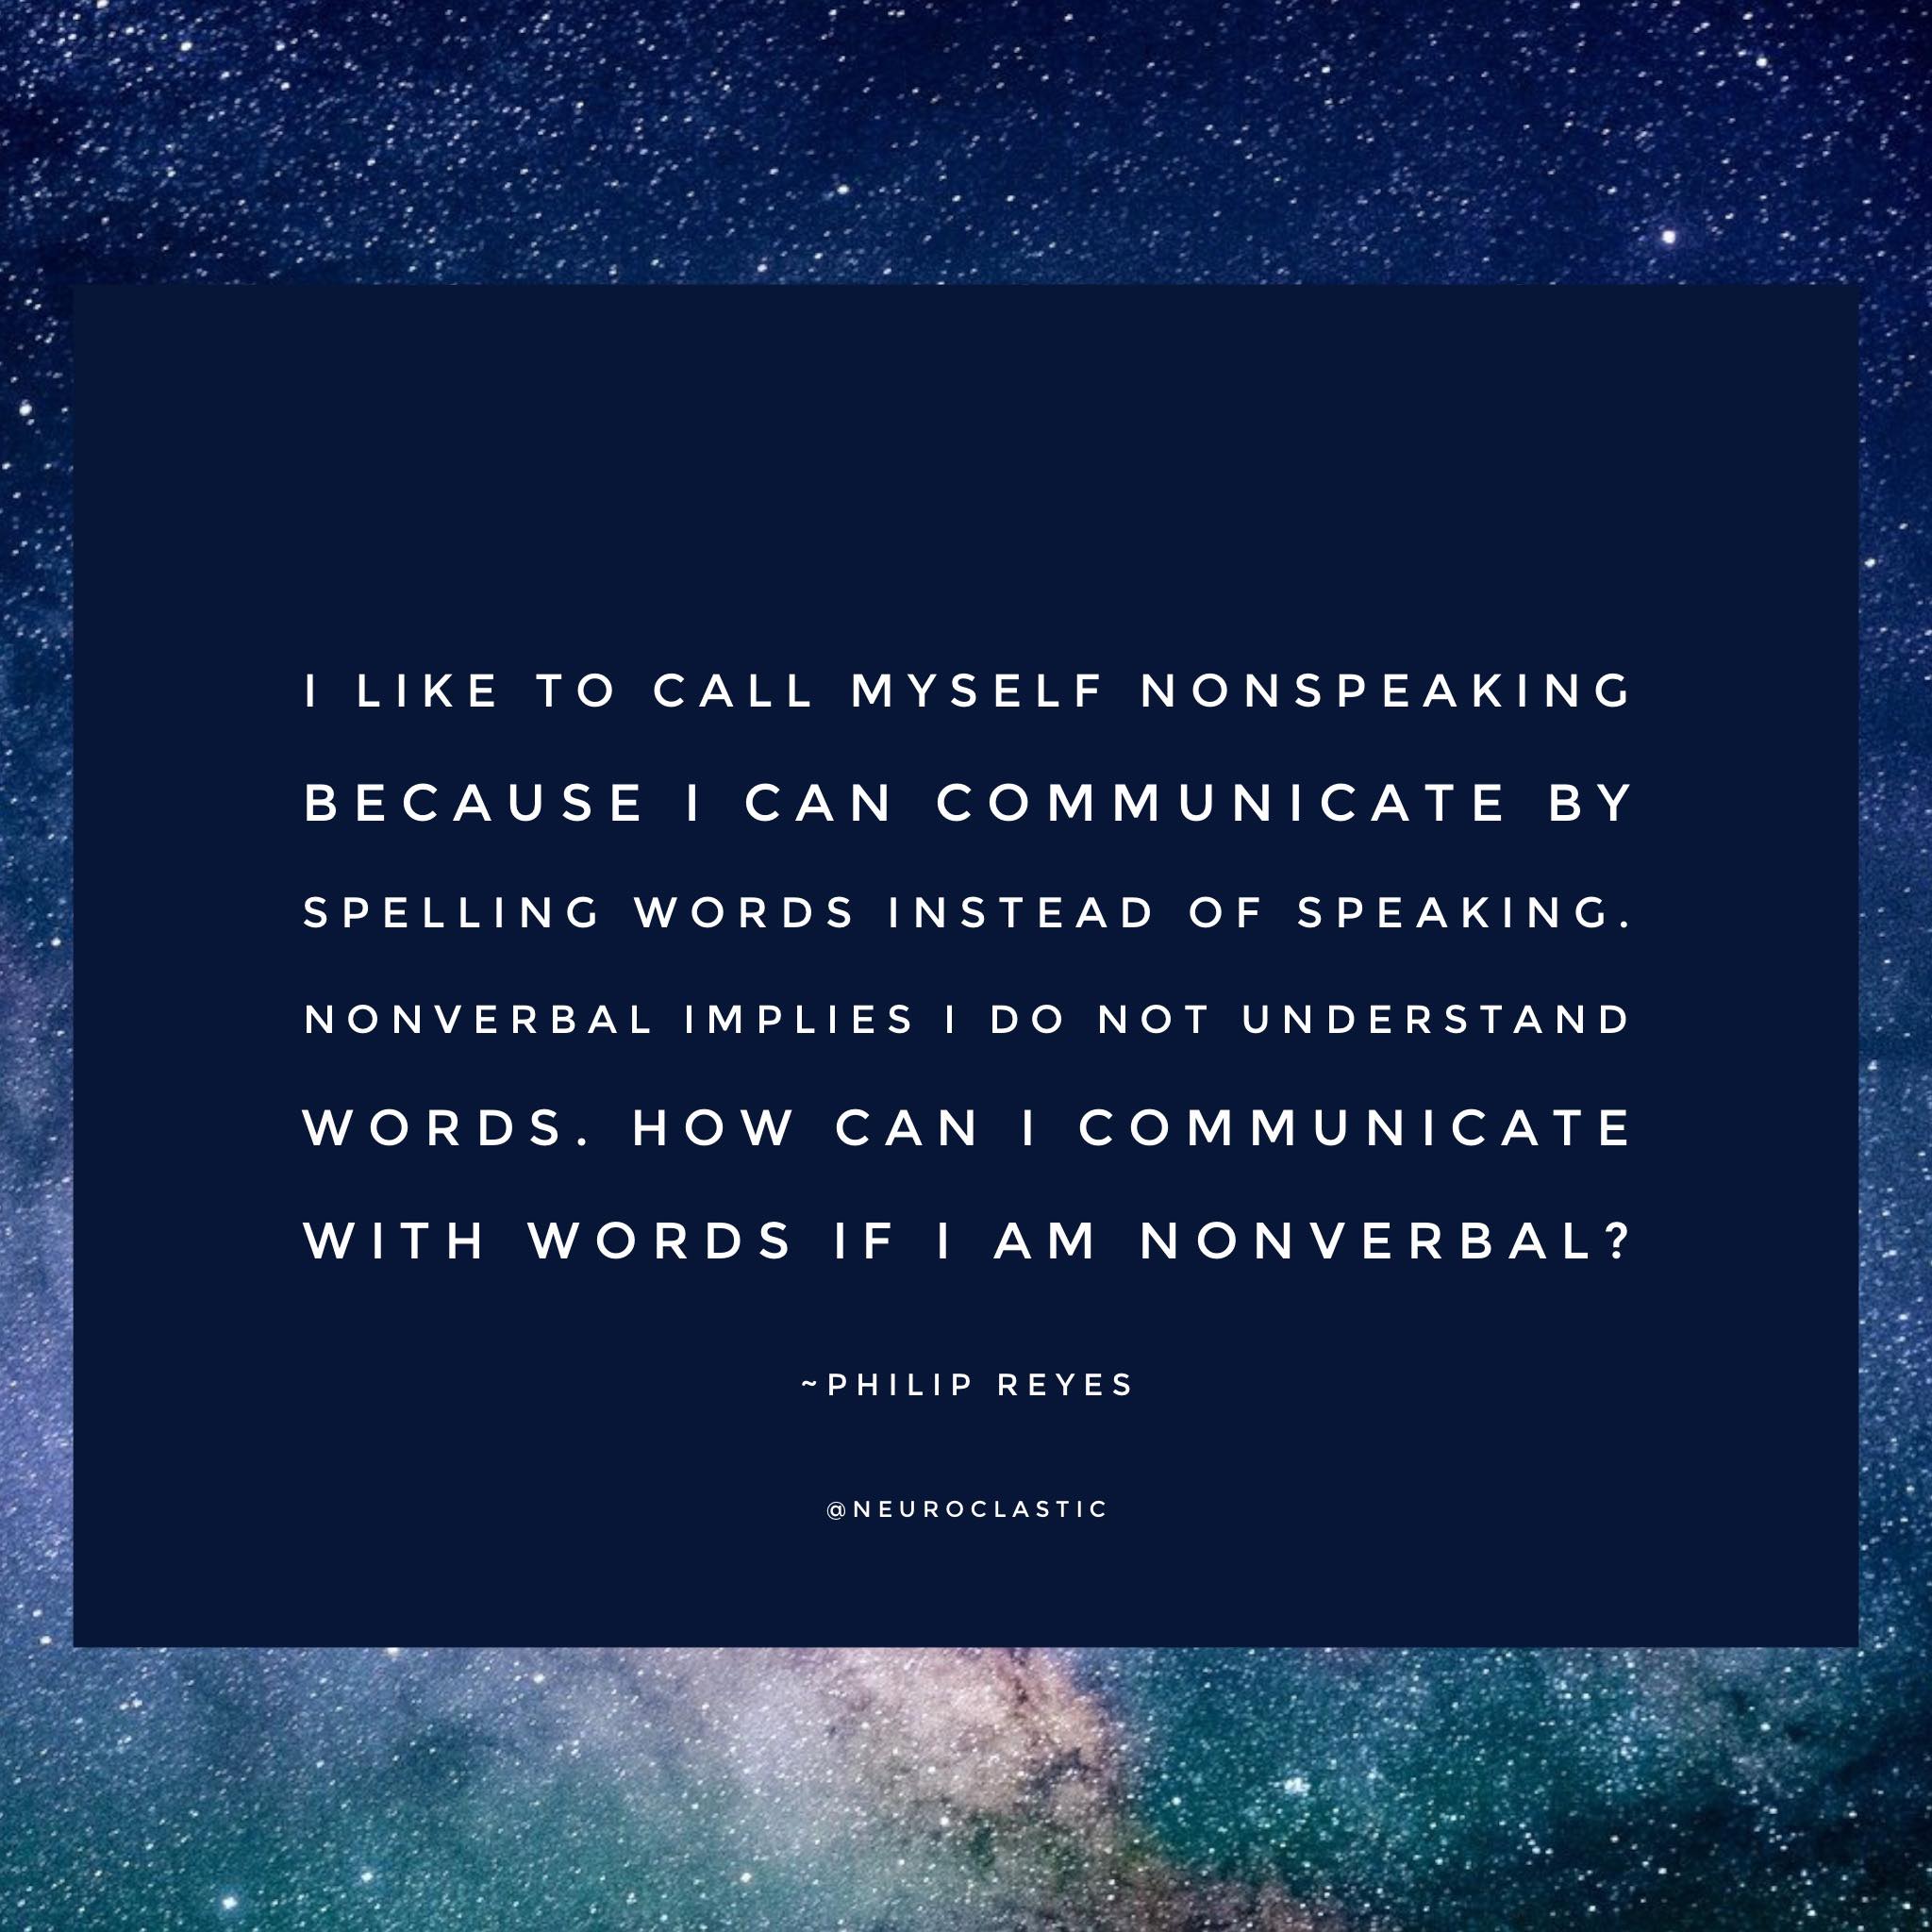 I like to call myself nonspeaking because I can communicate words by spelling instead of speaking. Nonverbal implies I do not understand words. How can I communicate with words if I am nonverbal? -Philip Reyes. Image has a colorful sky as the background with the quote above in a box.